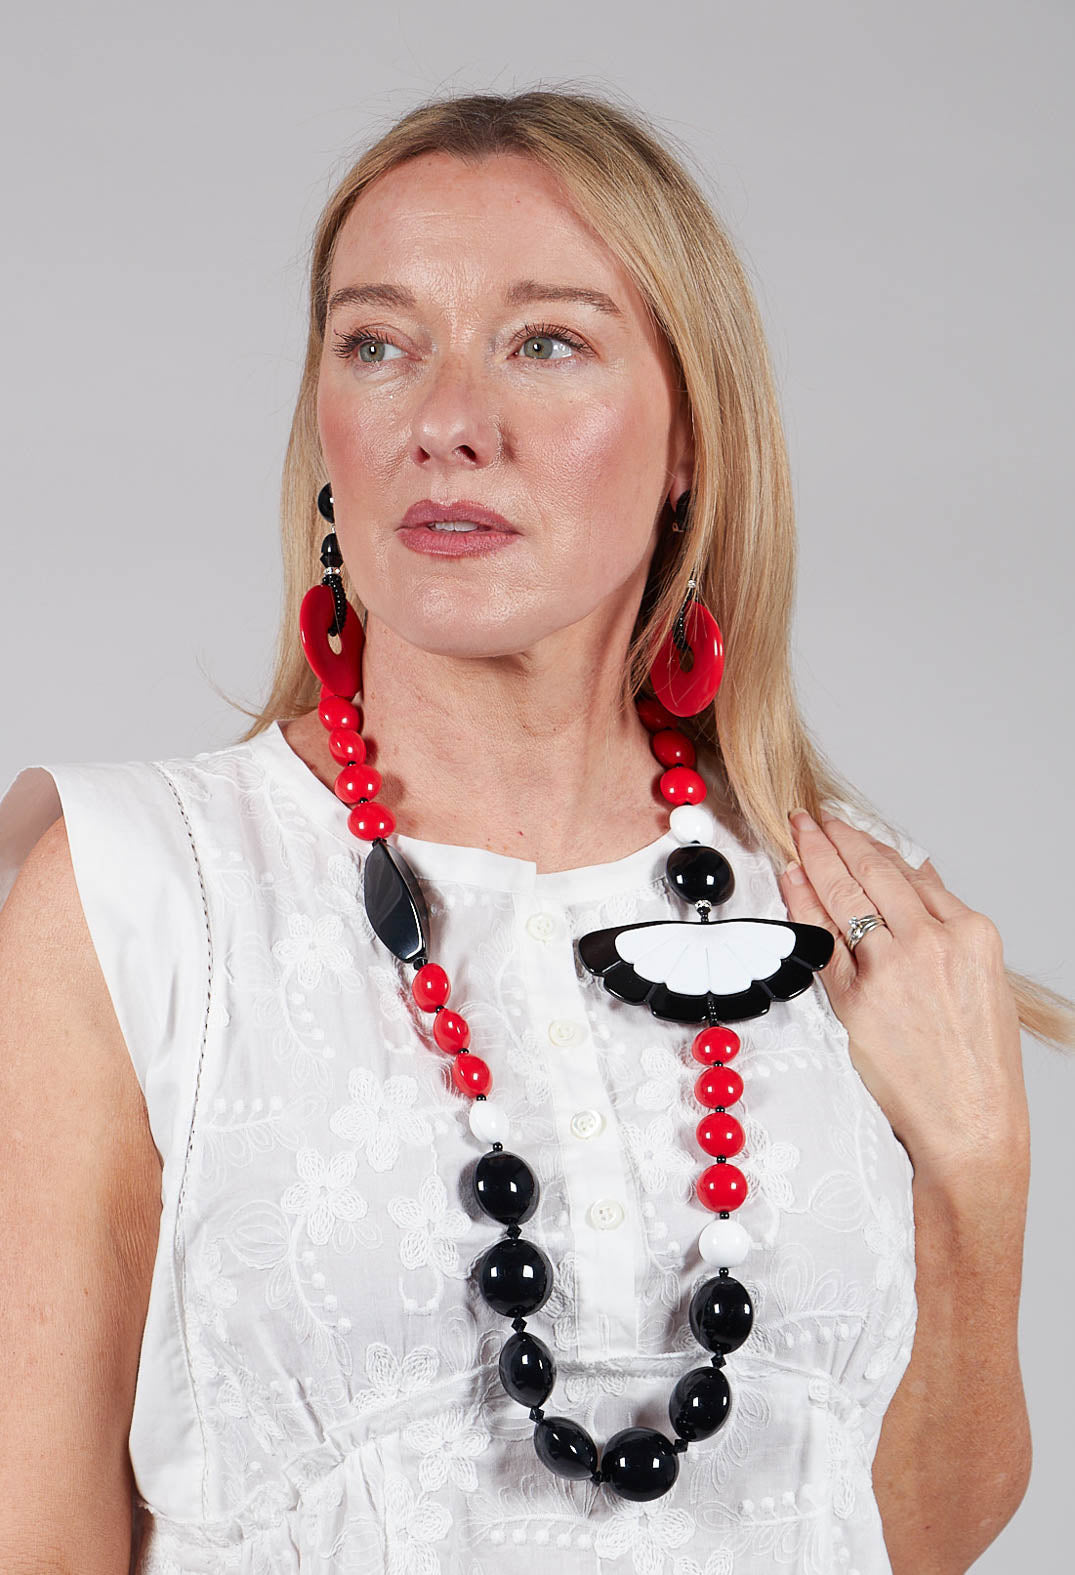 Beaded Necklace with Fan Pendant in Black, Red and White